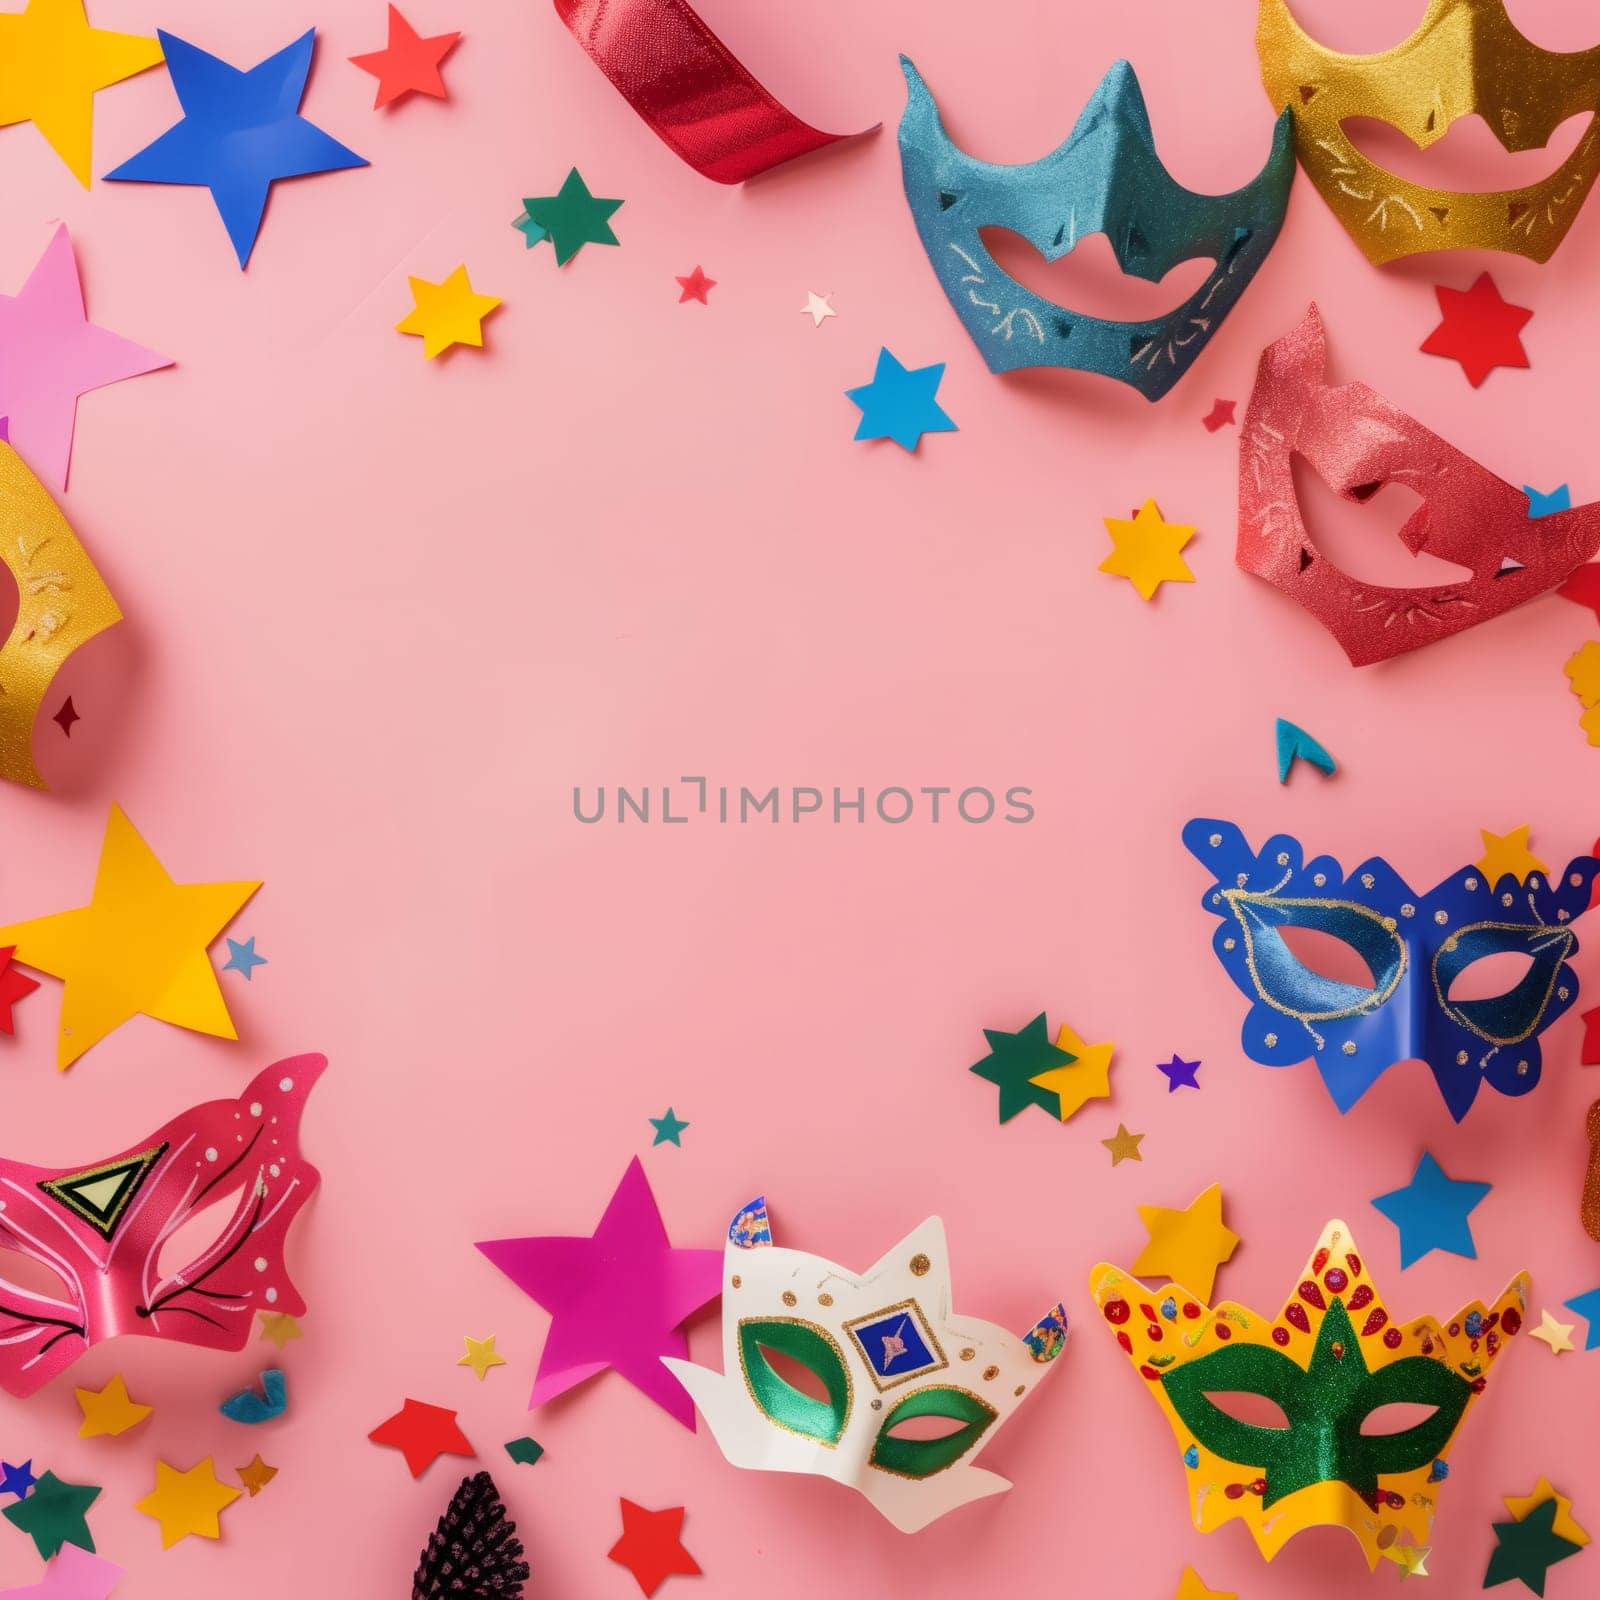 Homemade colorful masquerade mask, paper stars, tinsel and scattered confetti lie in a round frame on a pink background with copy space in price, flat lay close-up.